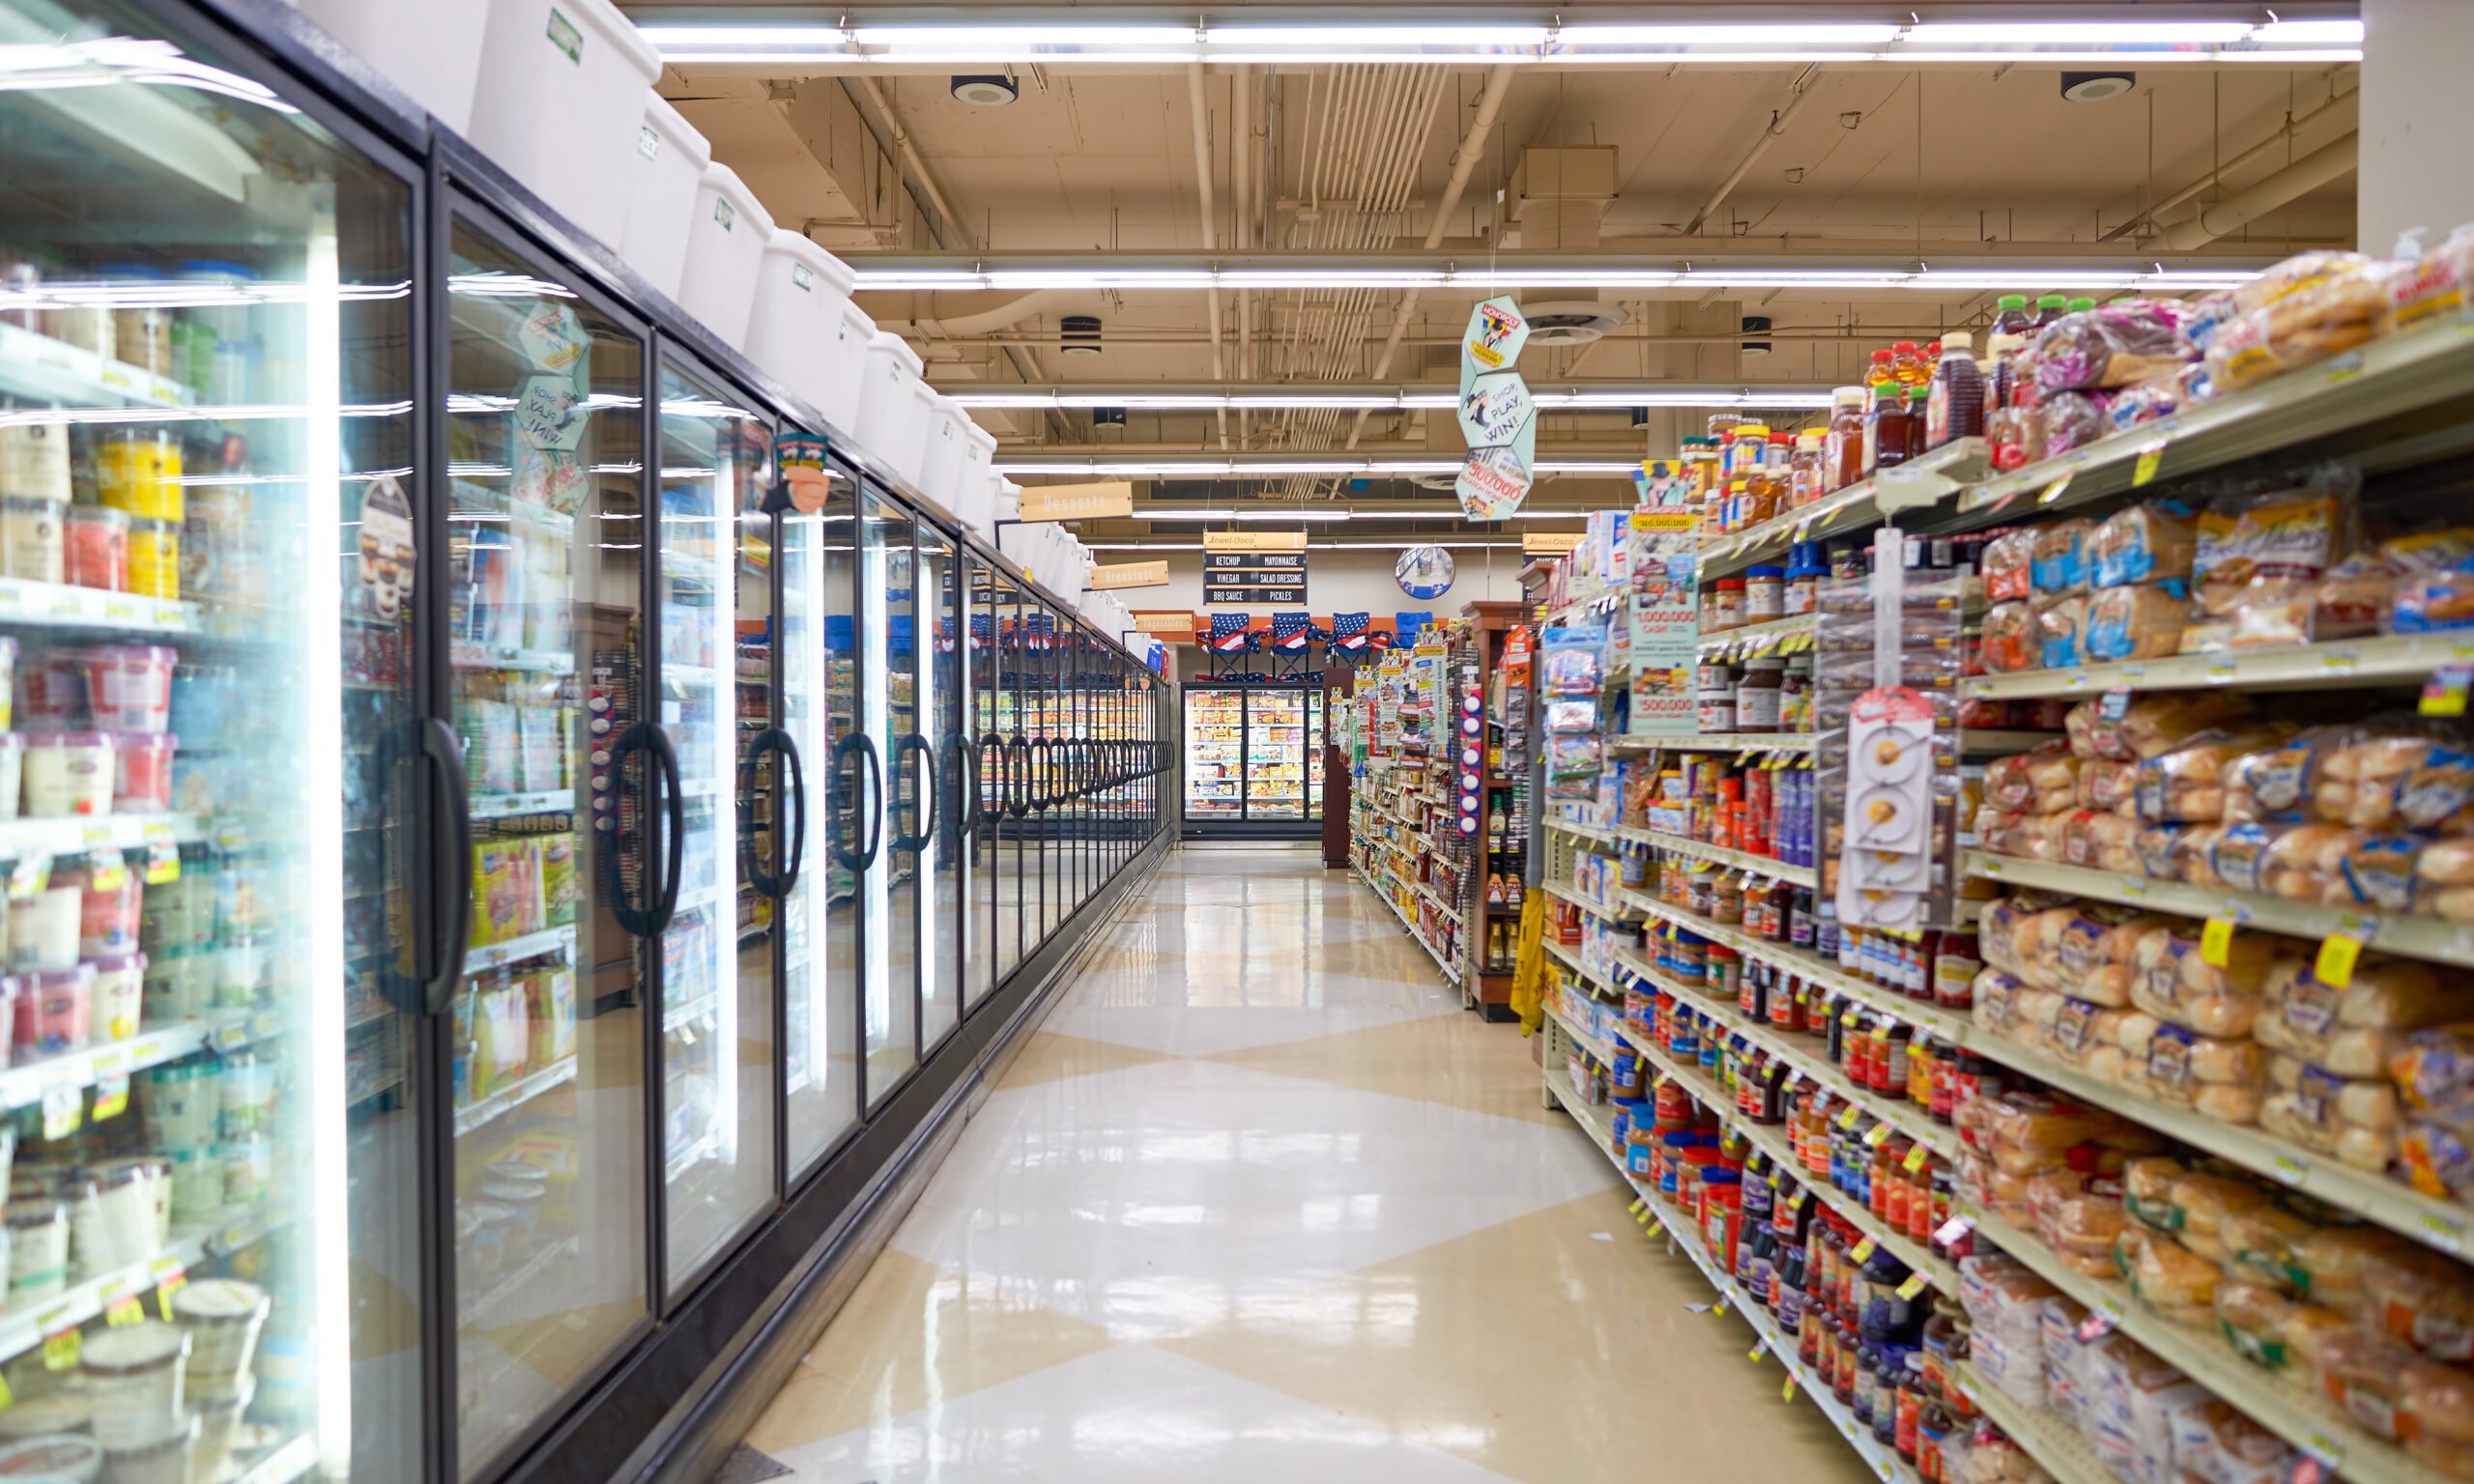 A grocery store aisle - on the left side it's a frozen section with glass doors, on the right hand side it's a bread section.